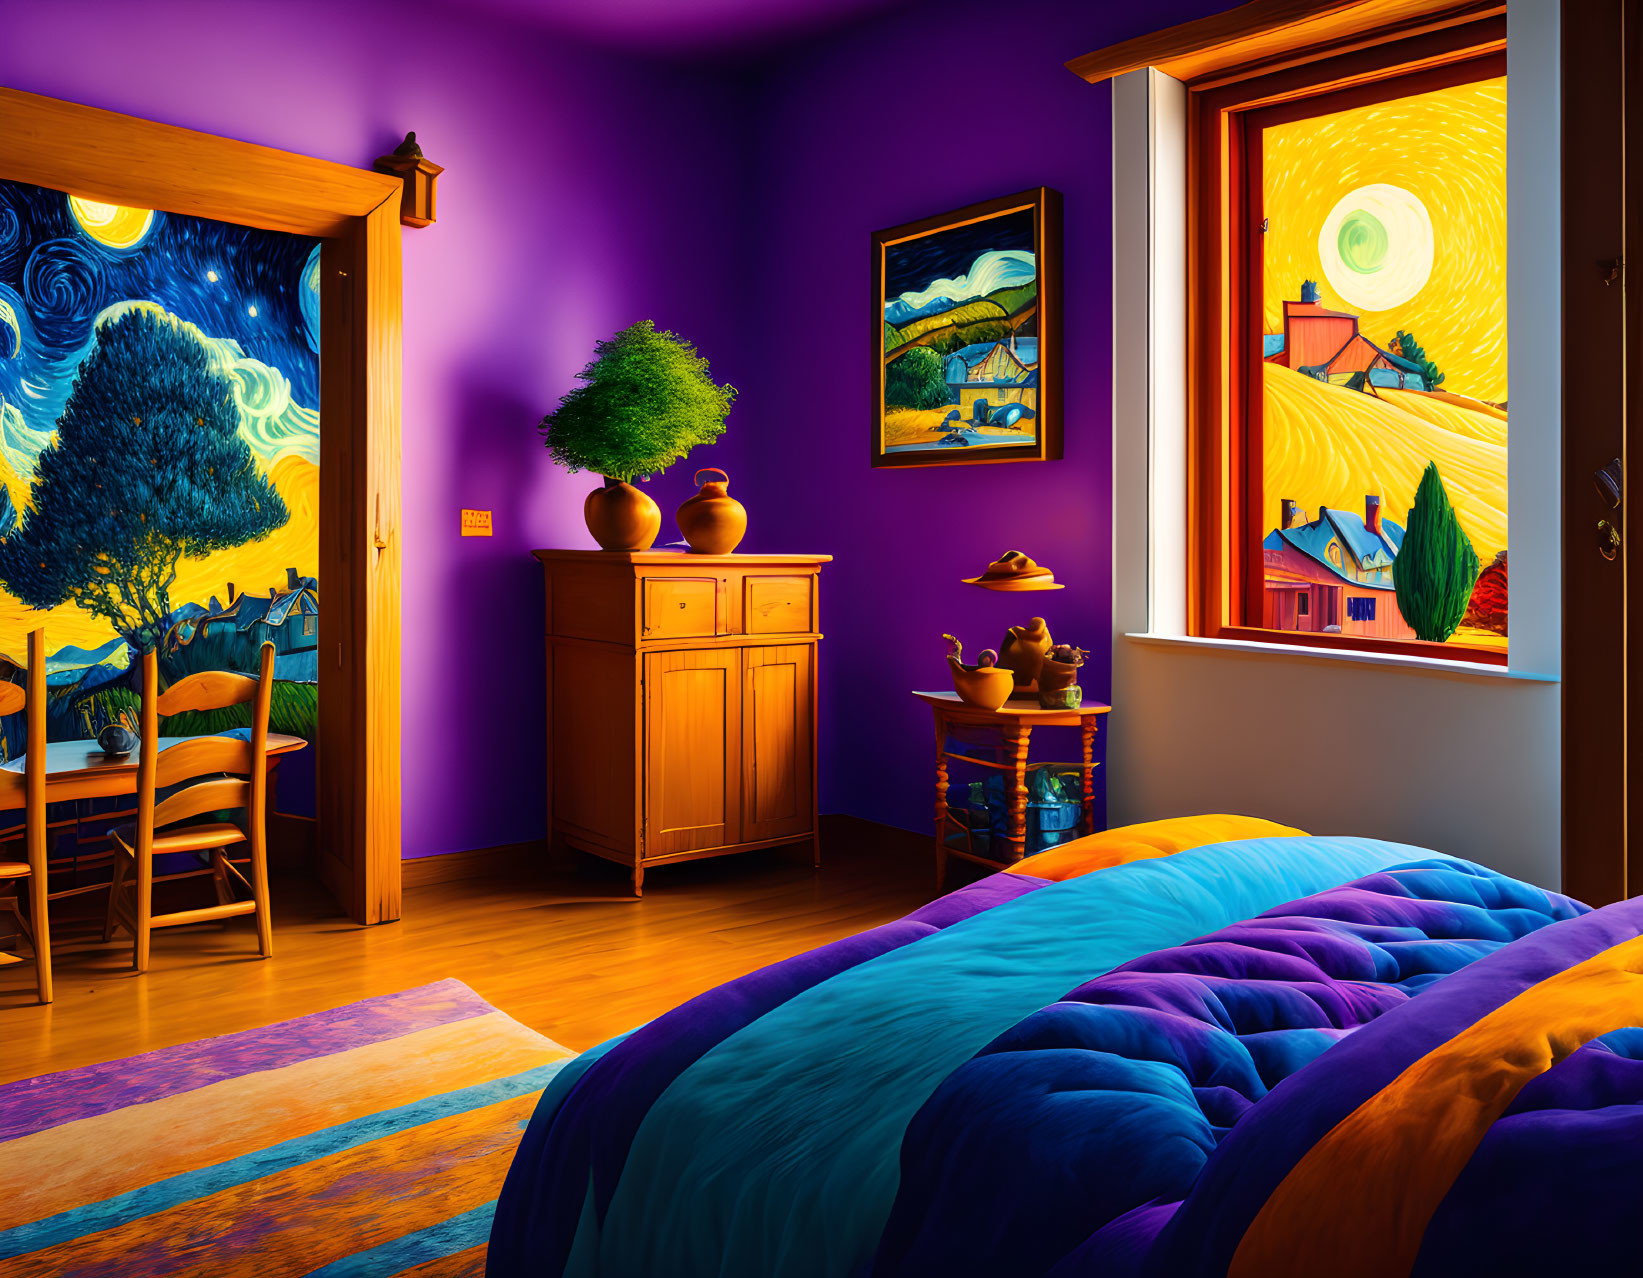 Vibrant bedroom with Van Gogh-inspired painted walls in bold purples and blues